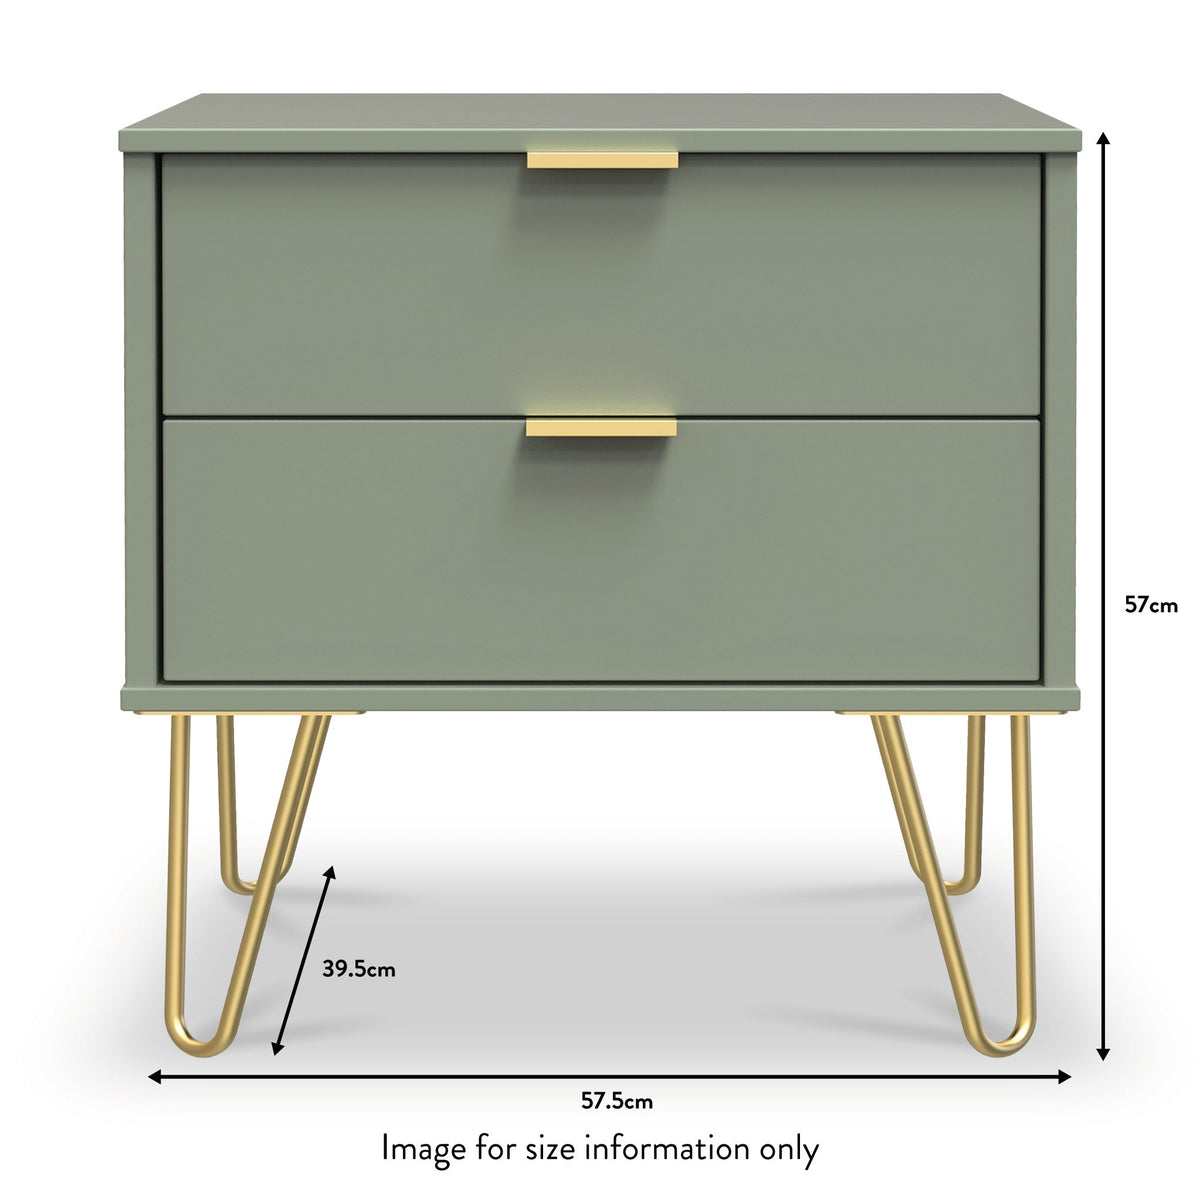 Moreno Olive Green 2 Drawer Wireless Charging Lamp Side Table with gold hairpin legs dimensions guide